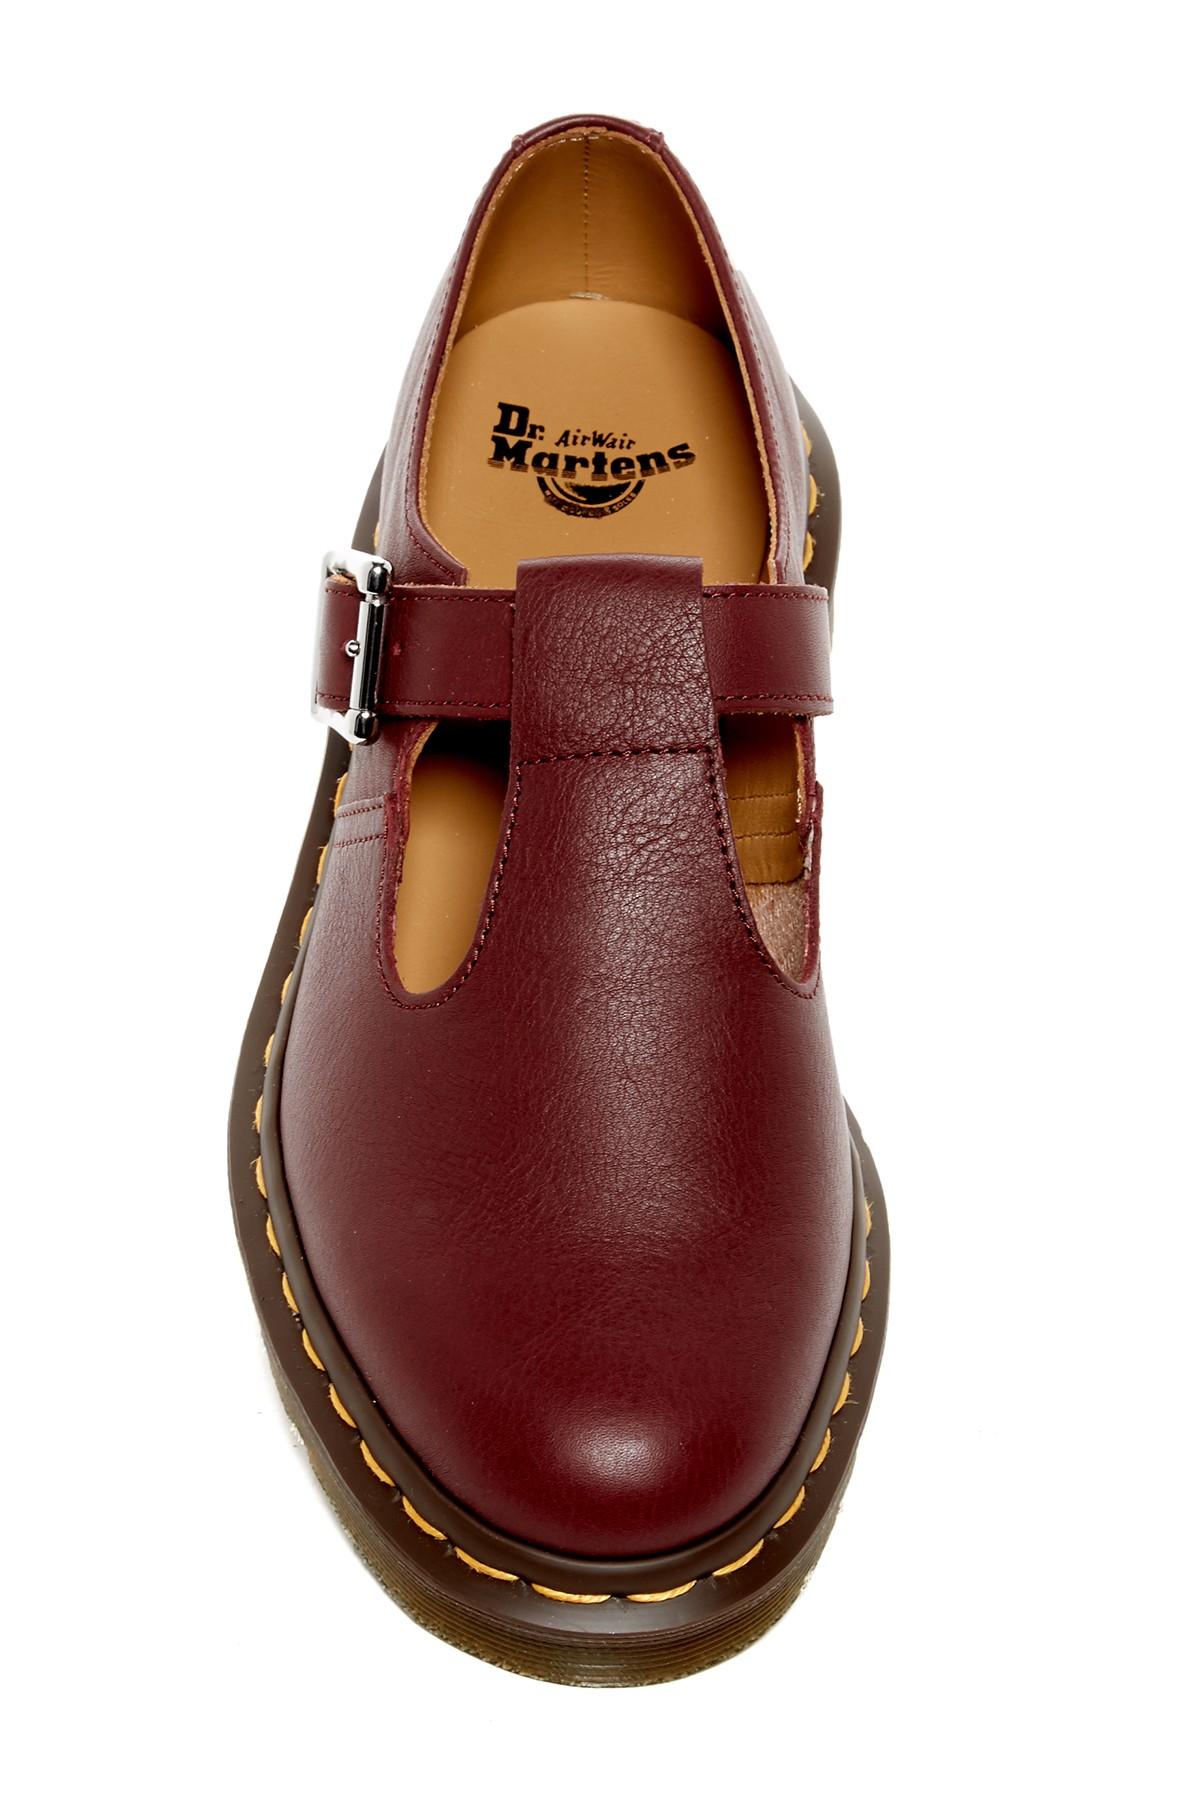 Dr. Martens Leather Polley Mary Jane Flat in Cherry Red (Red) | Lyst